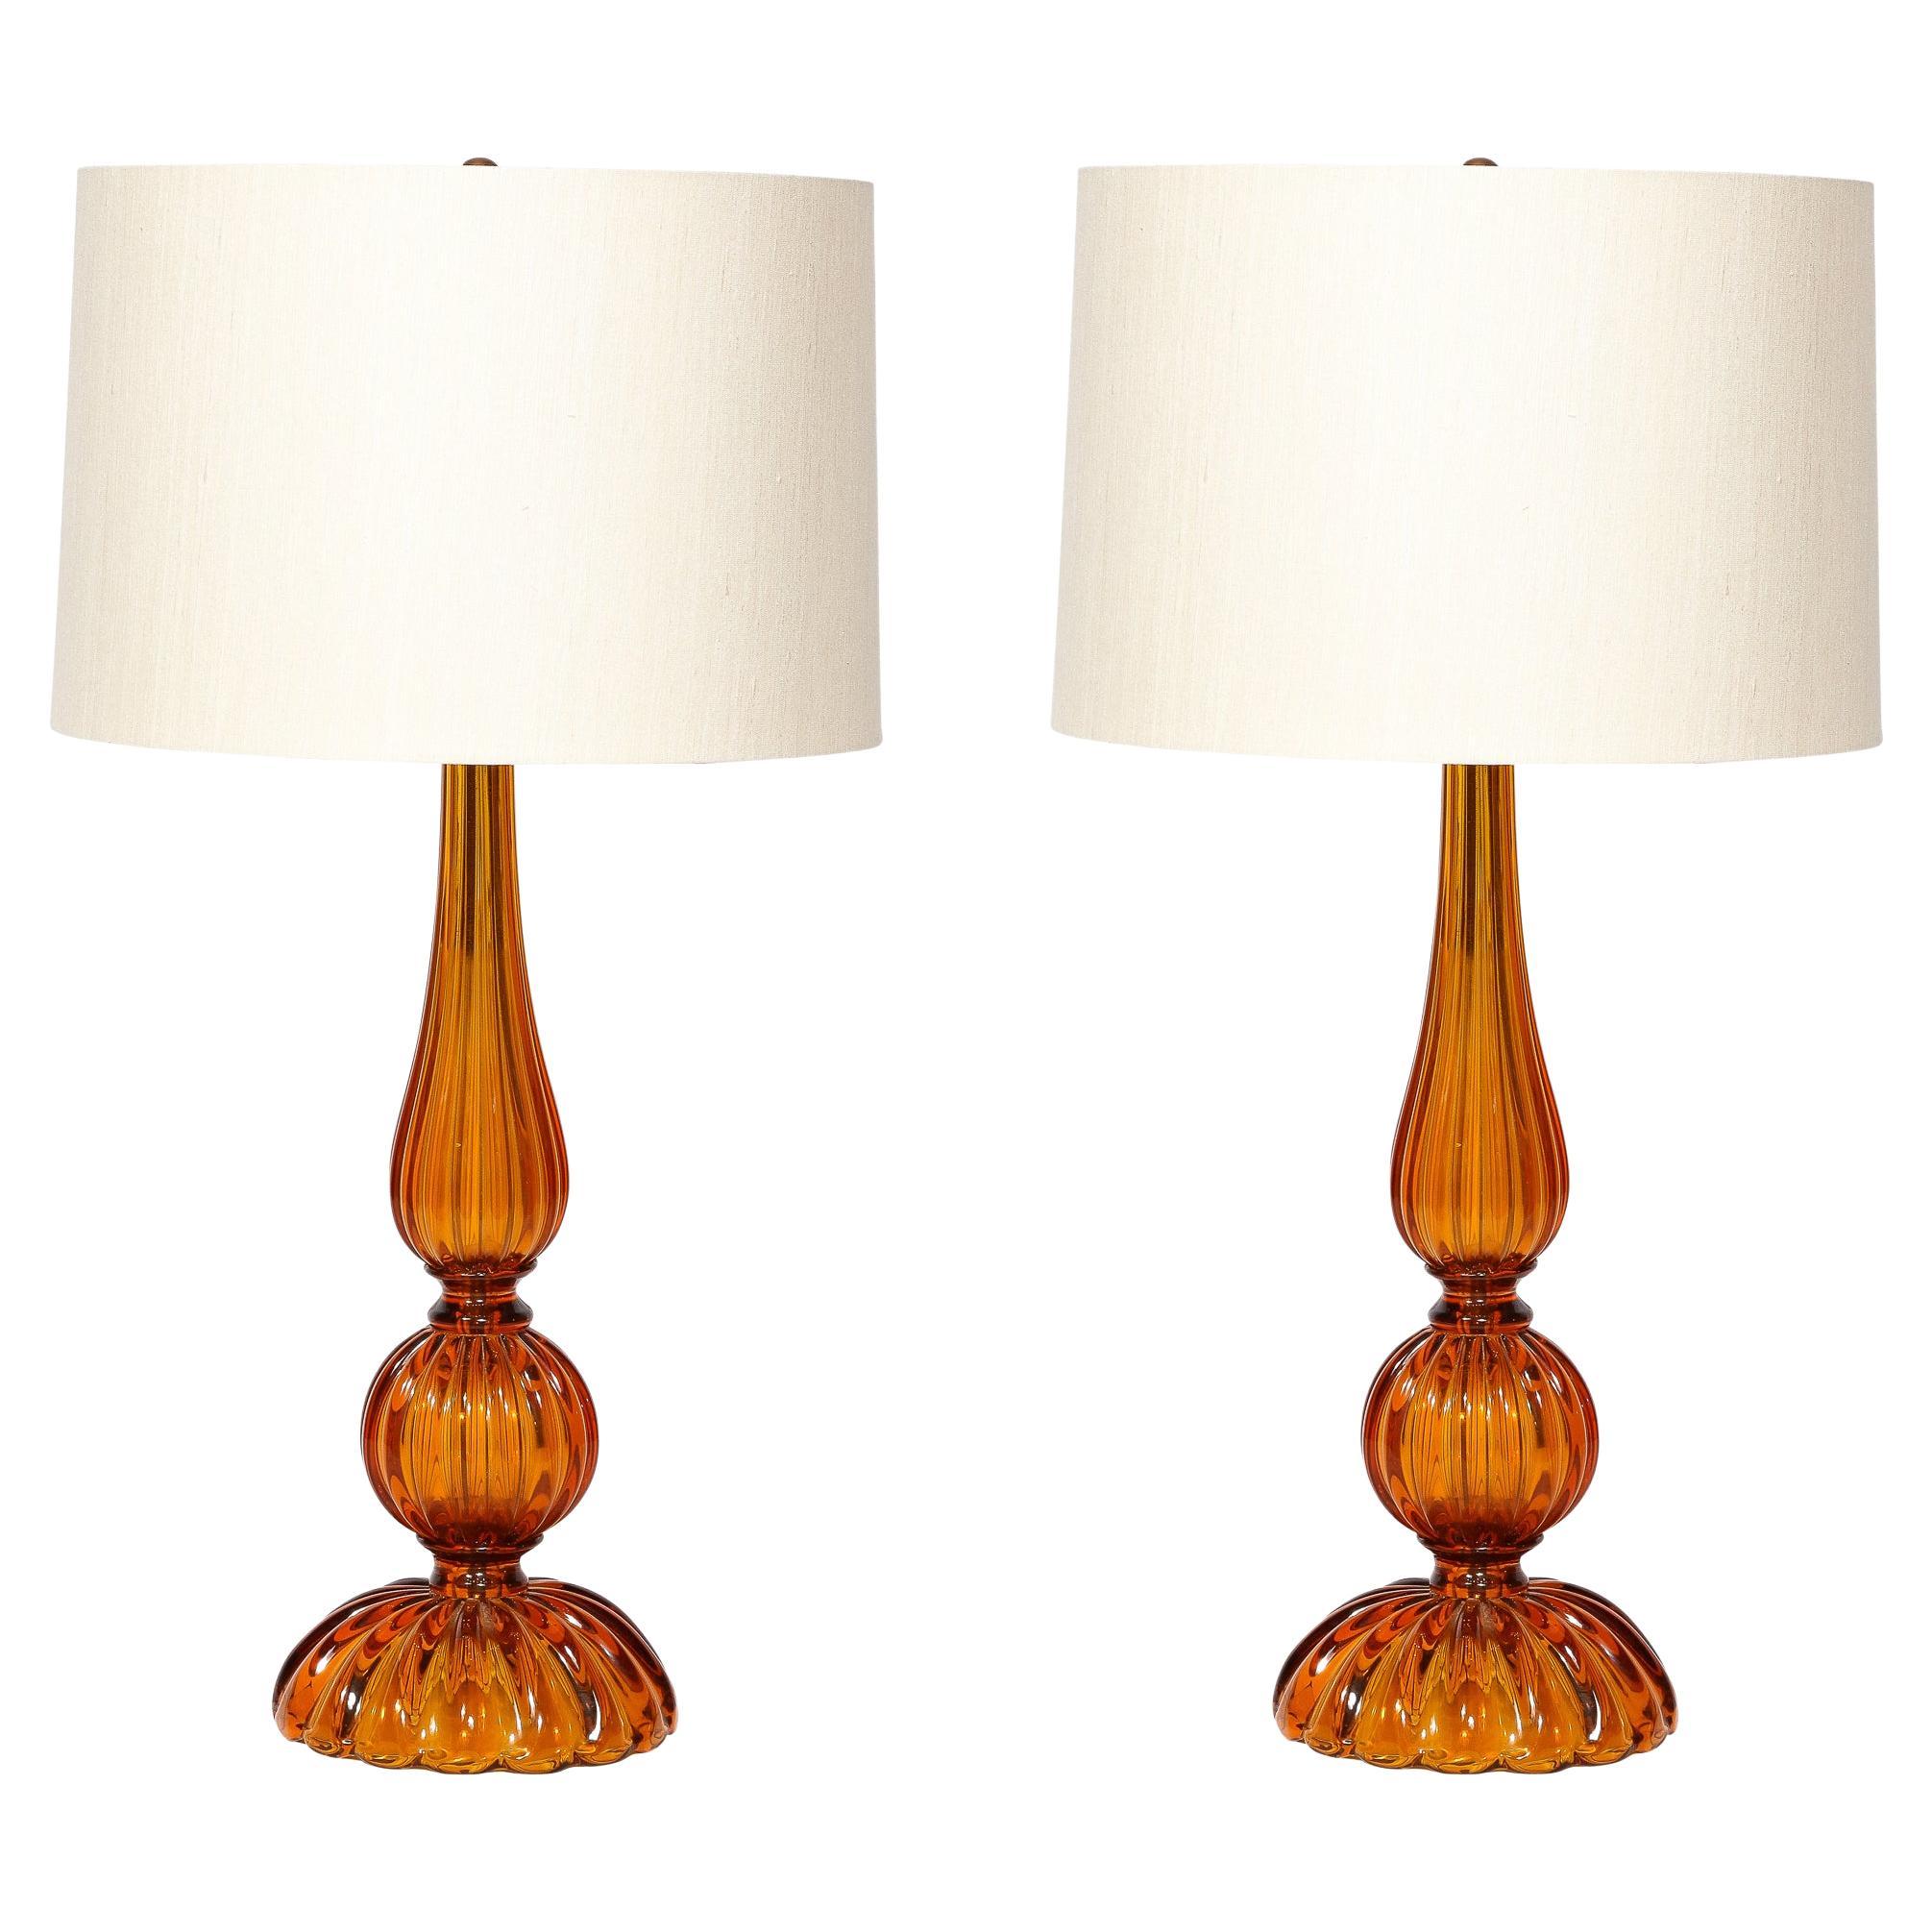 Pair of Hand-Blown Murano Glass Table Lamps in Smoked Amber